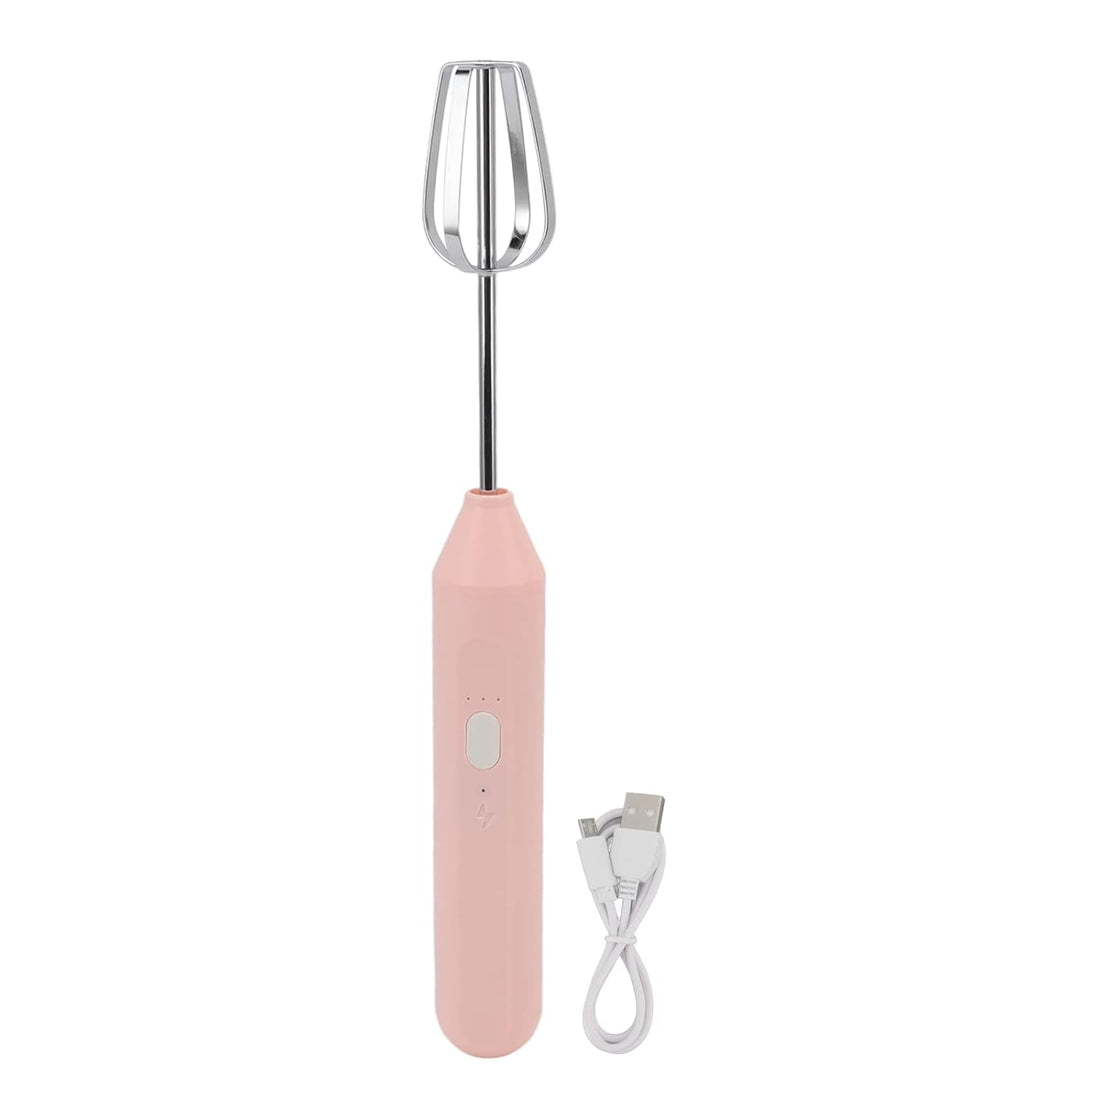 Handheld Milk Frother, Portable Hand Mixer Electric Battery Powered, Egg Beater Coffee Frother Handheld Milkshake Blender Foamer Kitchen Tool(Pink)